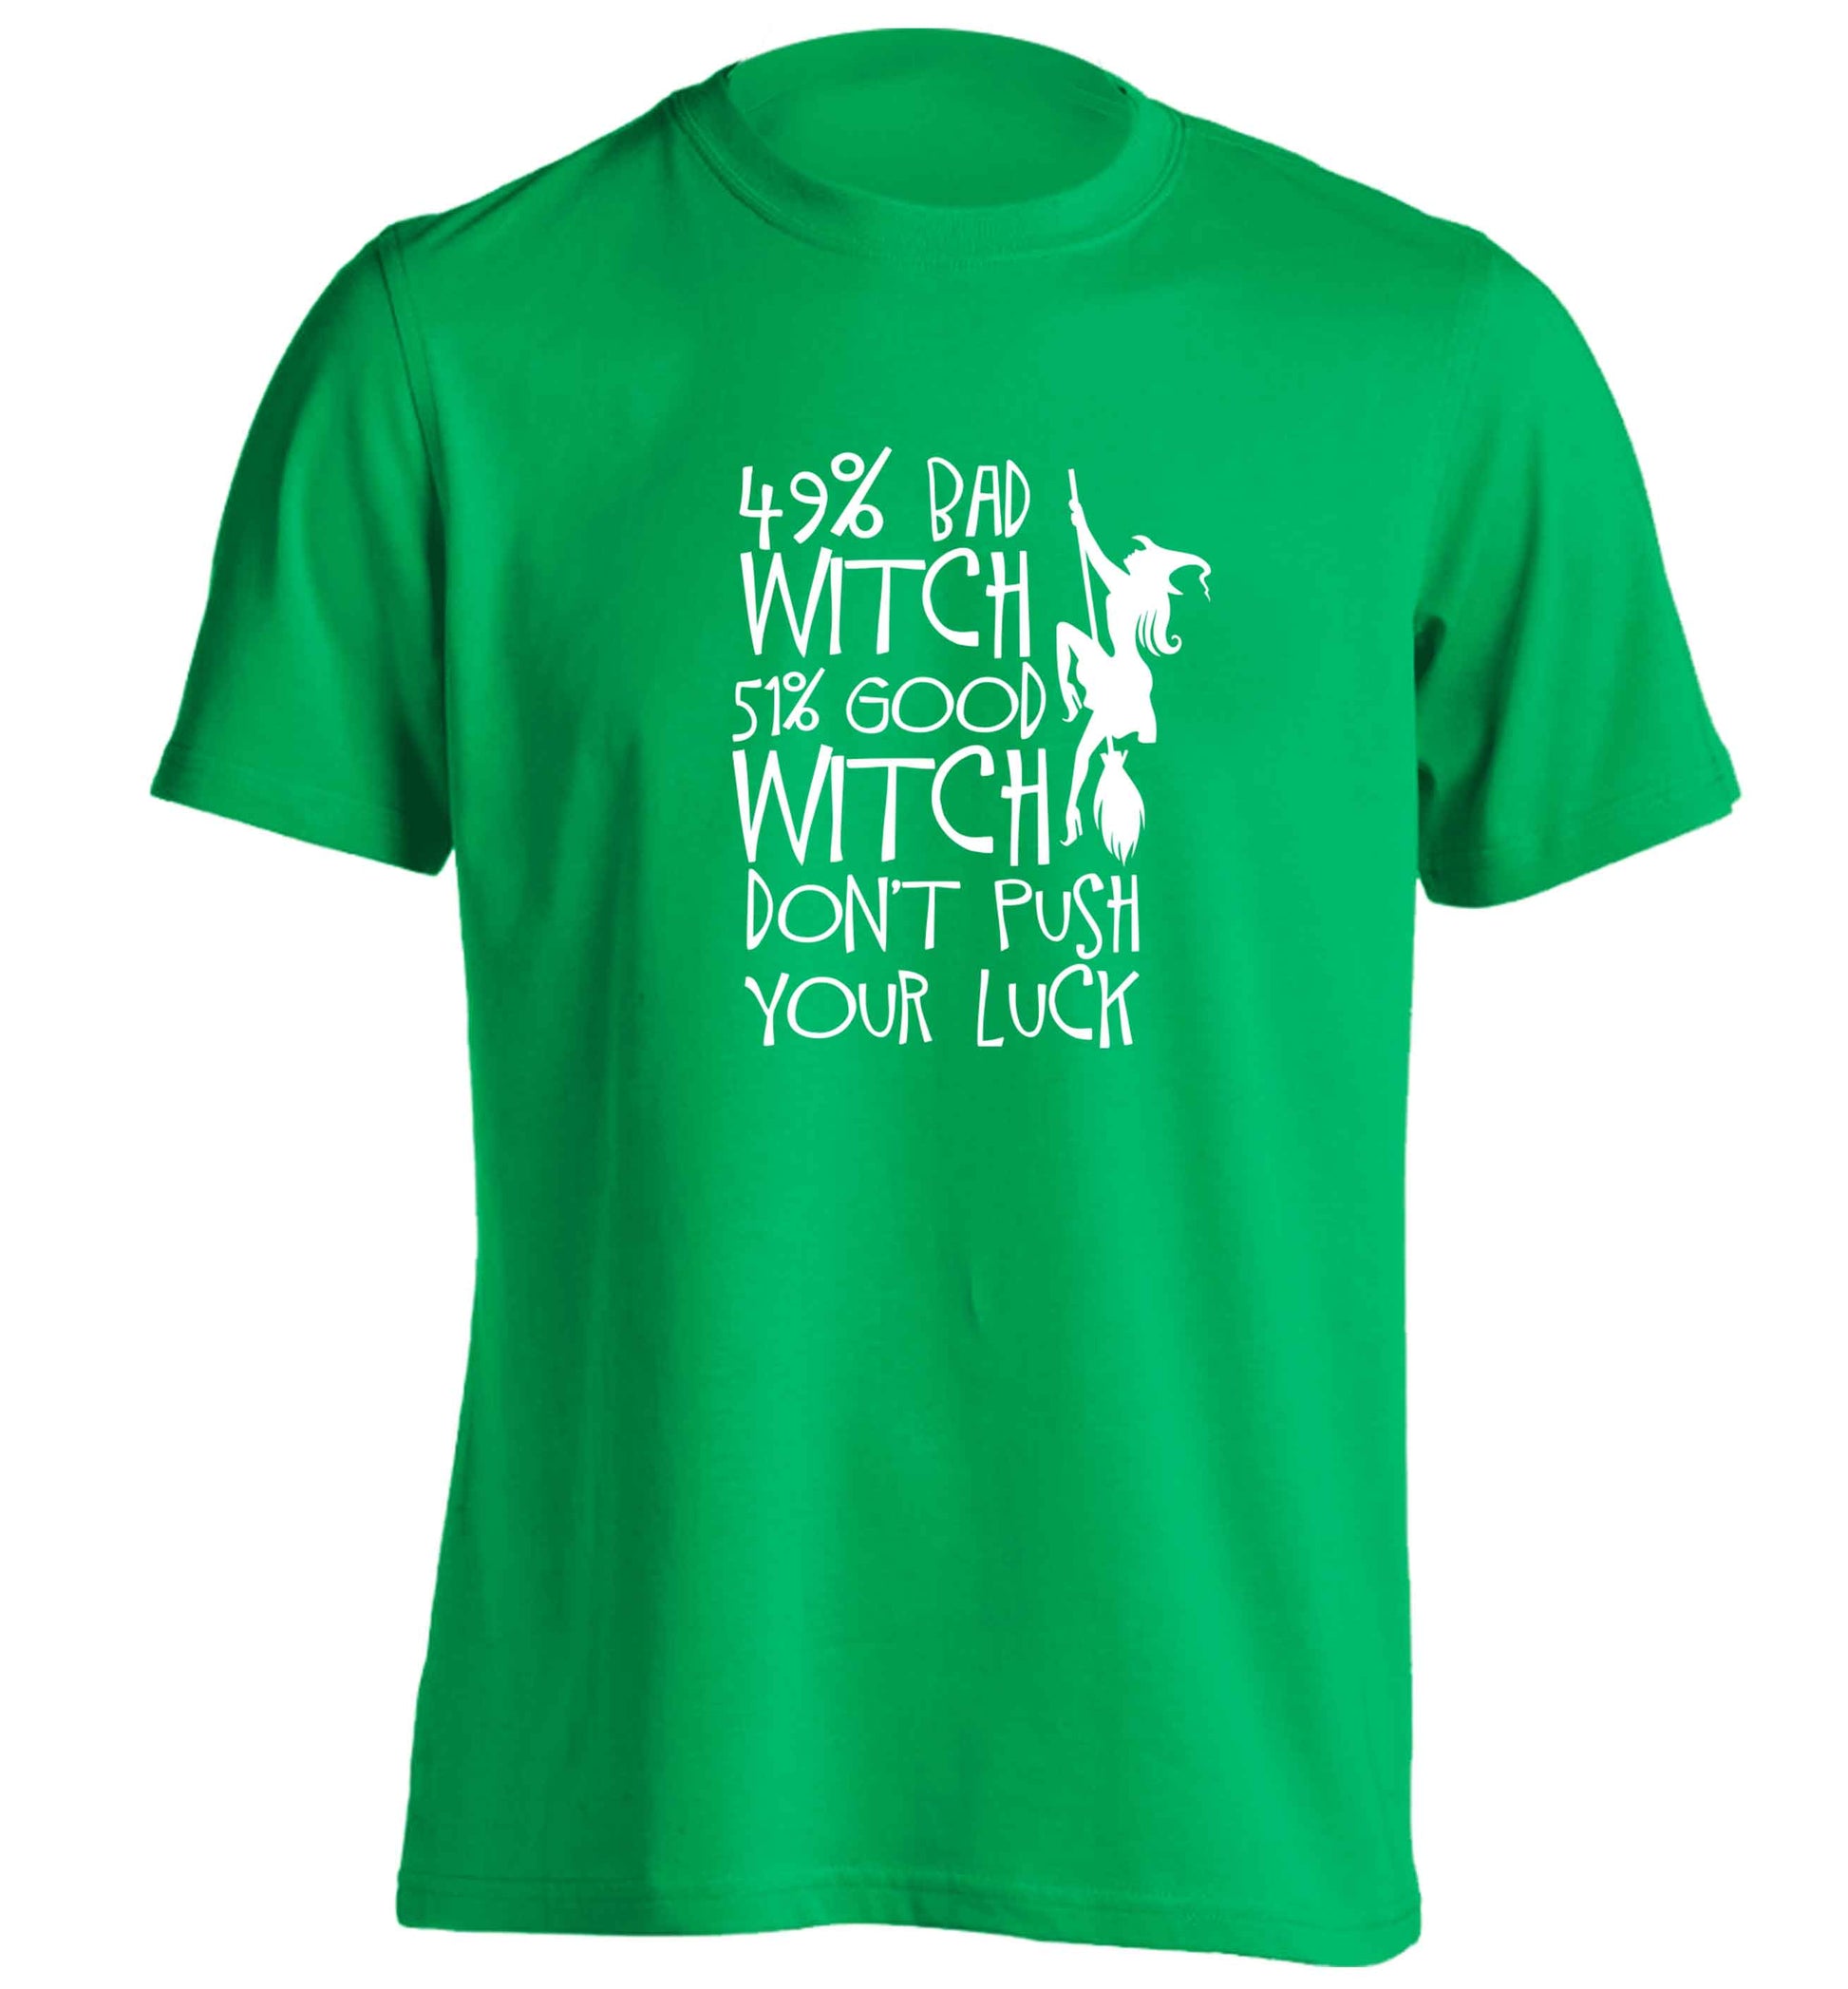 49% bad witch 51% good witch don't push your luck adults unisex green Tshirt 2XL